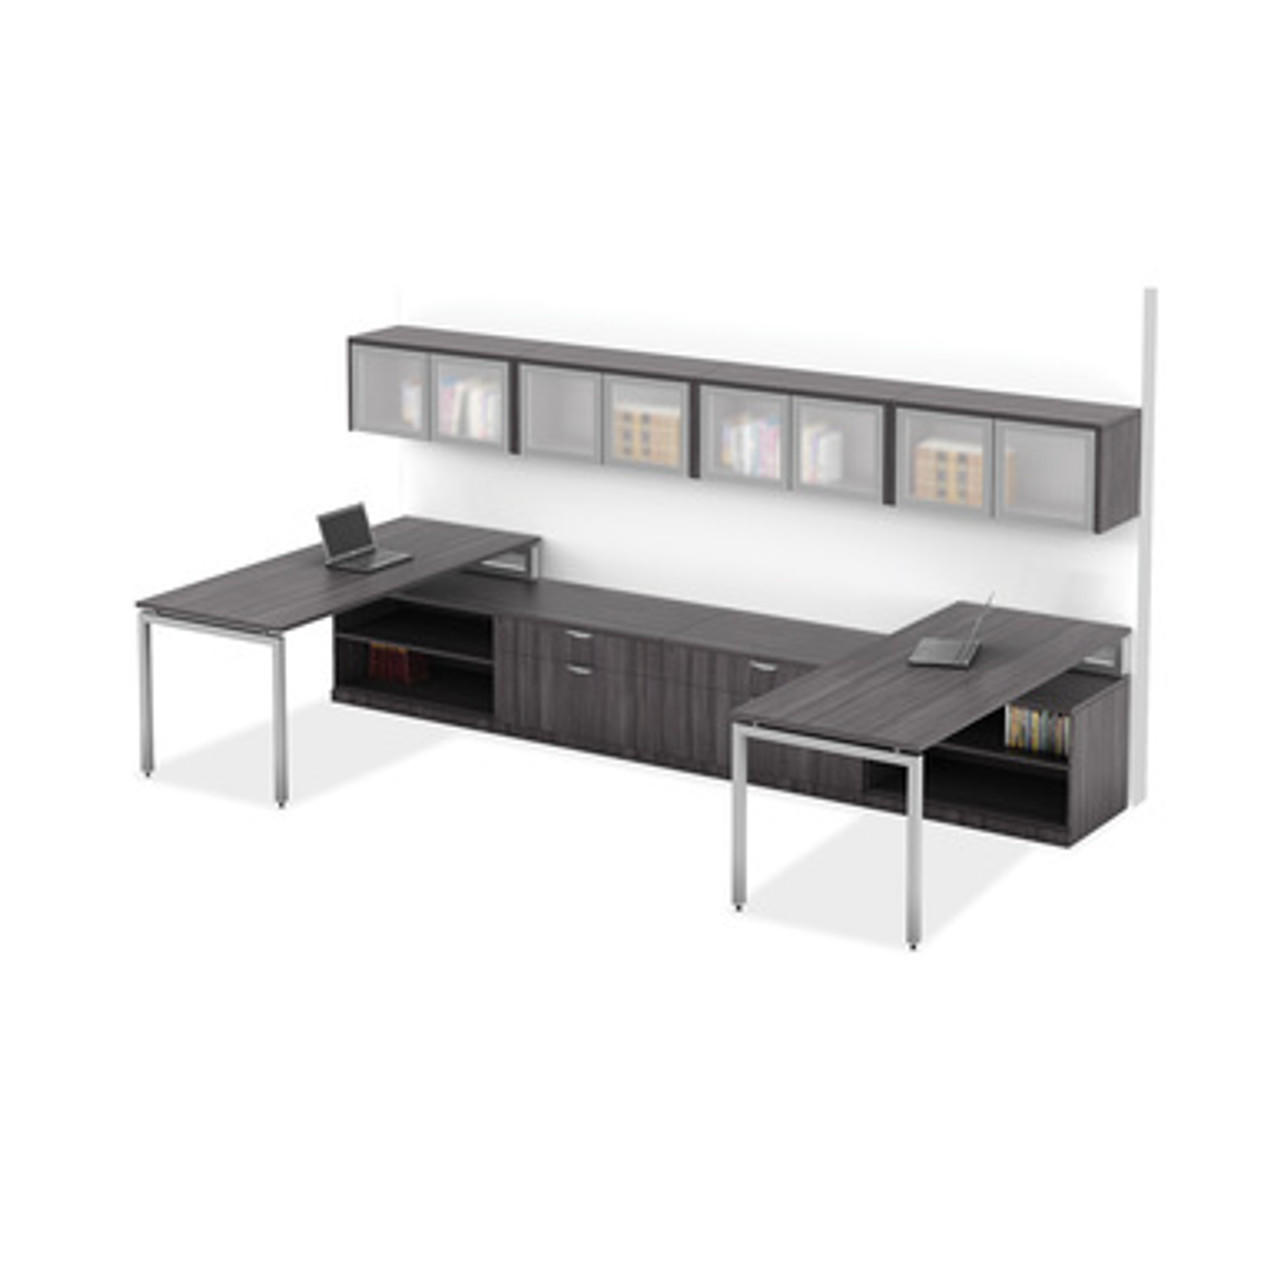  Office Source Variant Collection 2 Person Along-The-Wall Desk Configuration OS51 